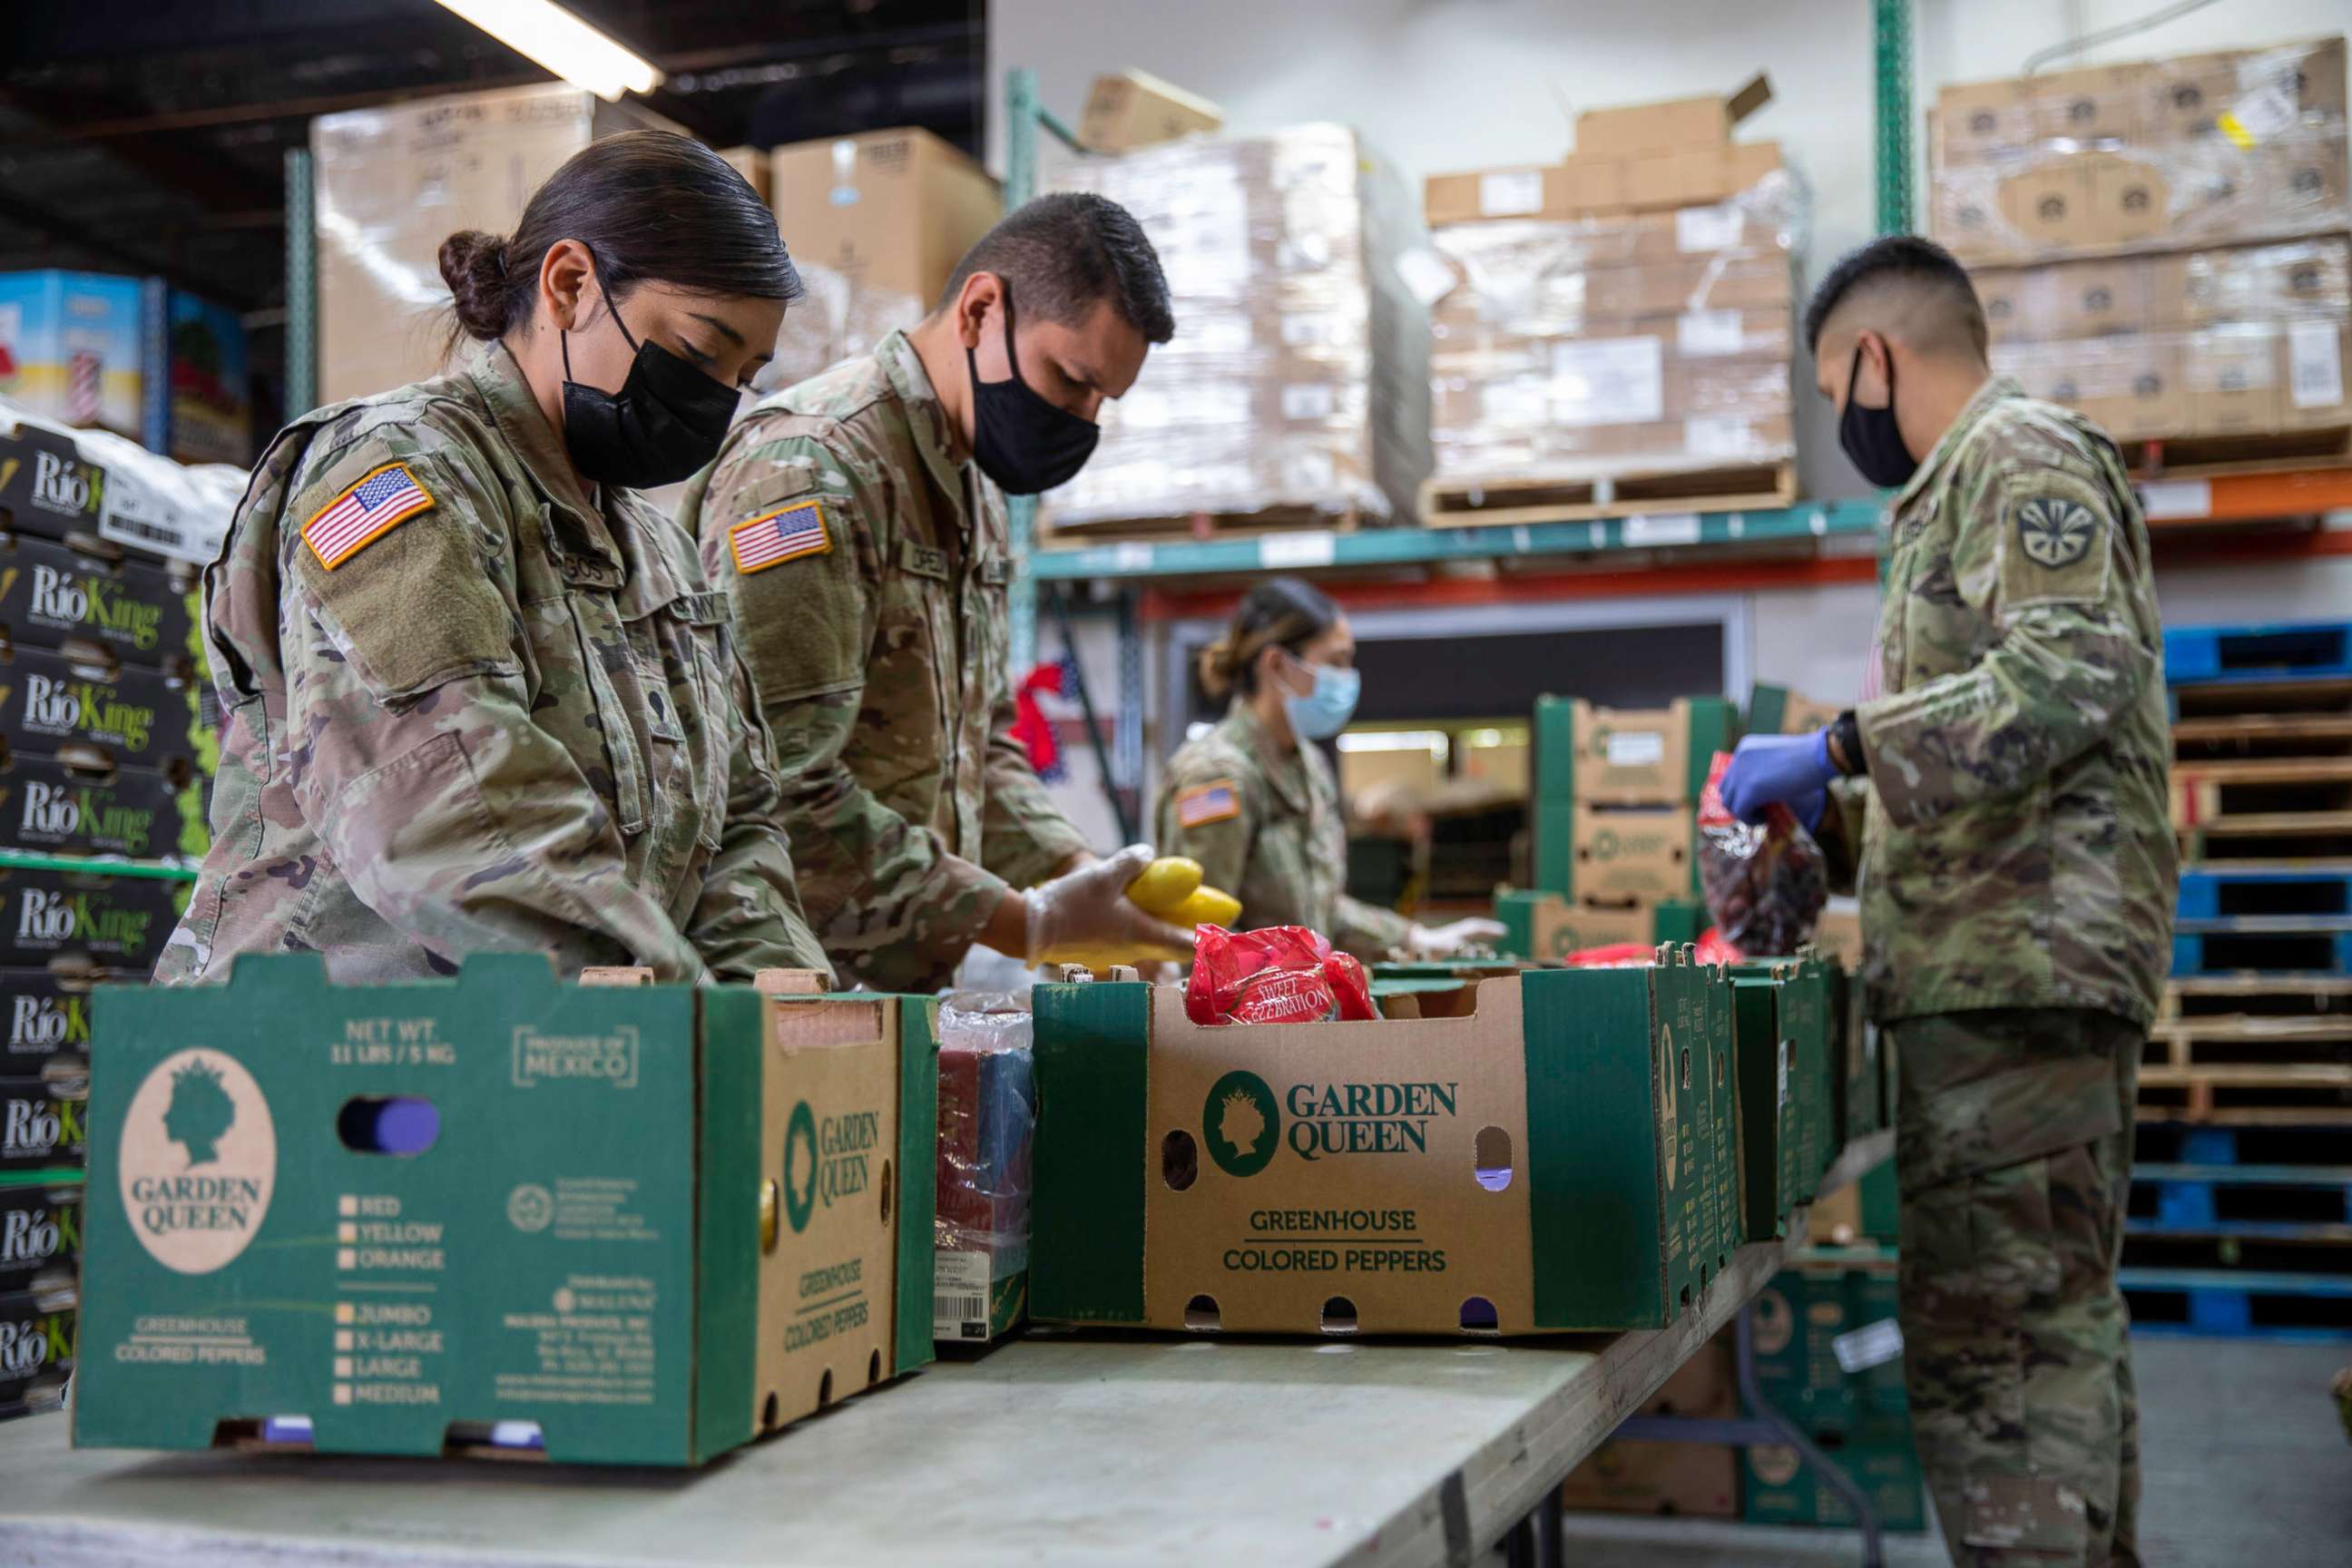 PHOTO: Soldiers with the Arizona National Guard load boxes with fresh produce at a local food bank in Phoenix, Ariz., May 21, 2021.